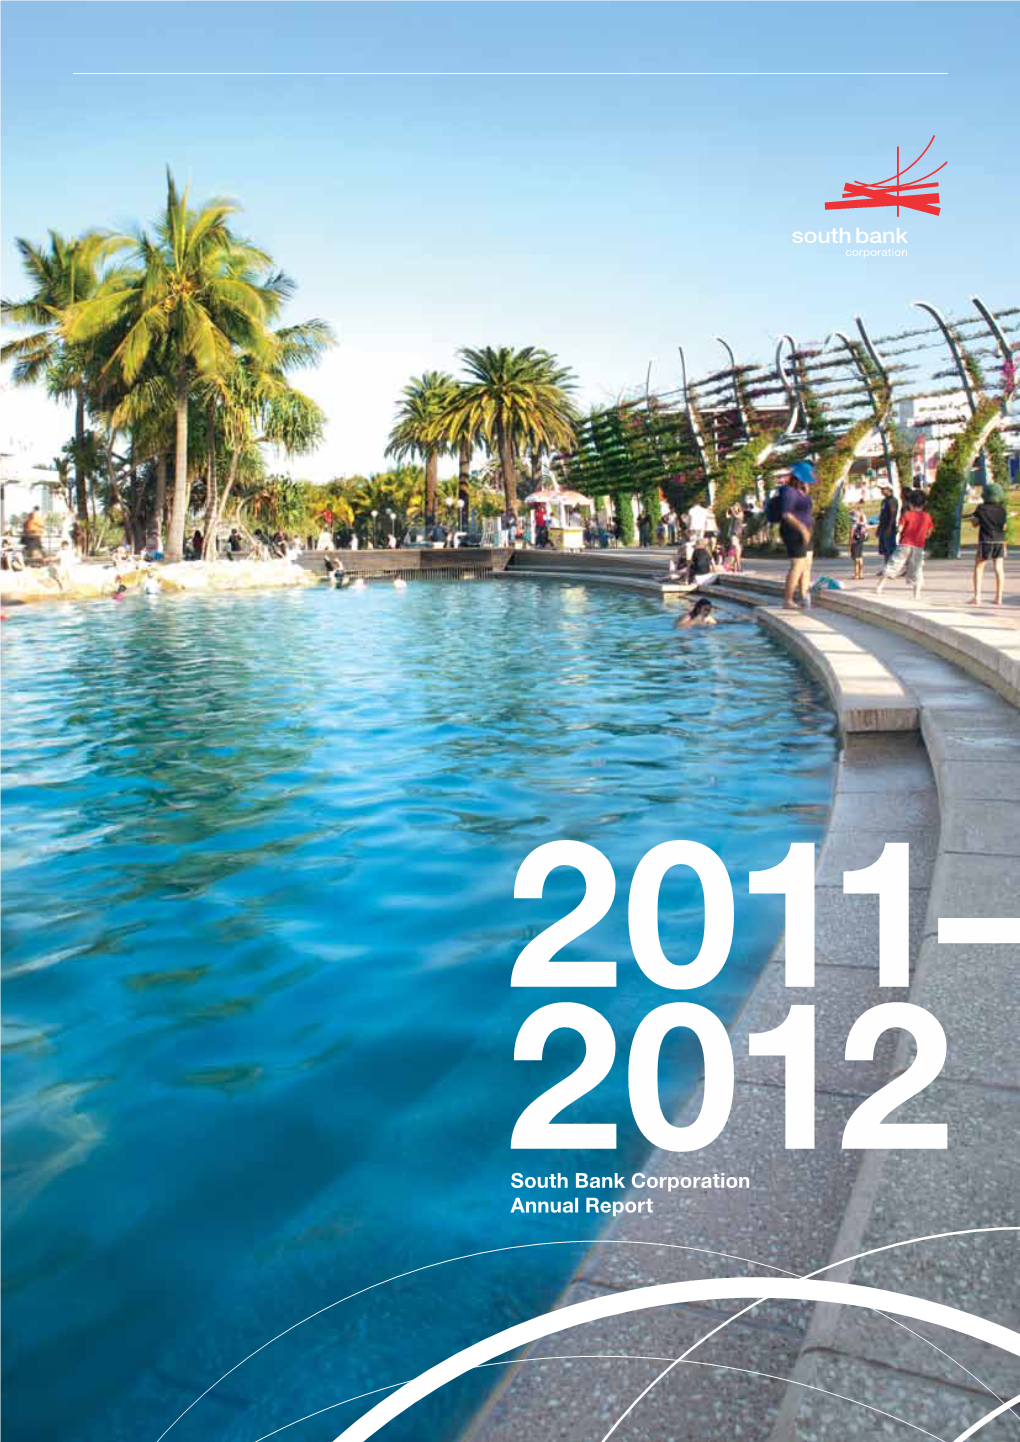 South Bank Corporation Annual Report